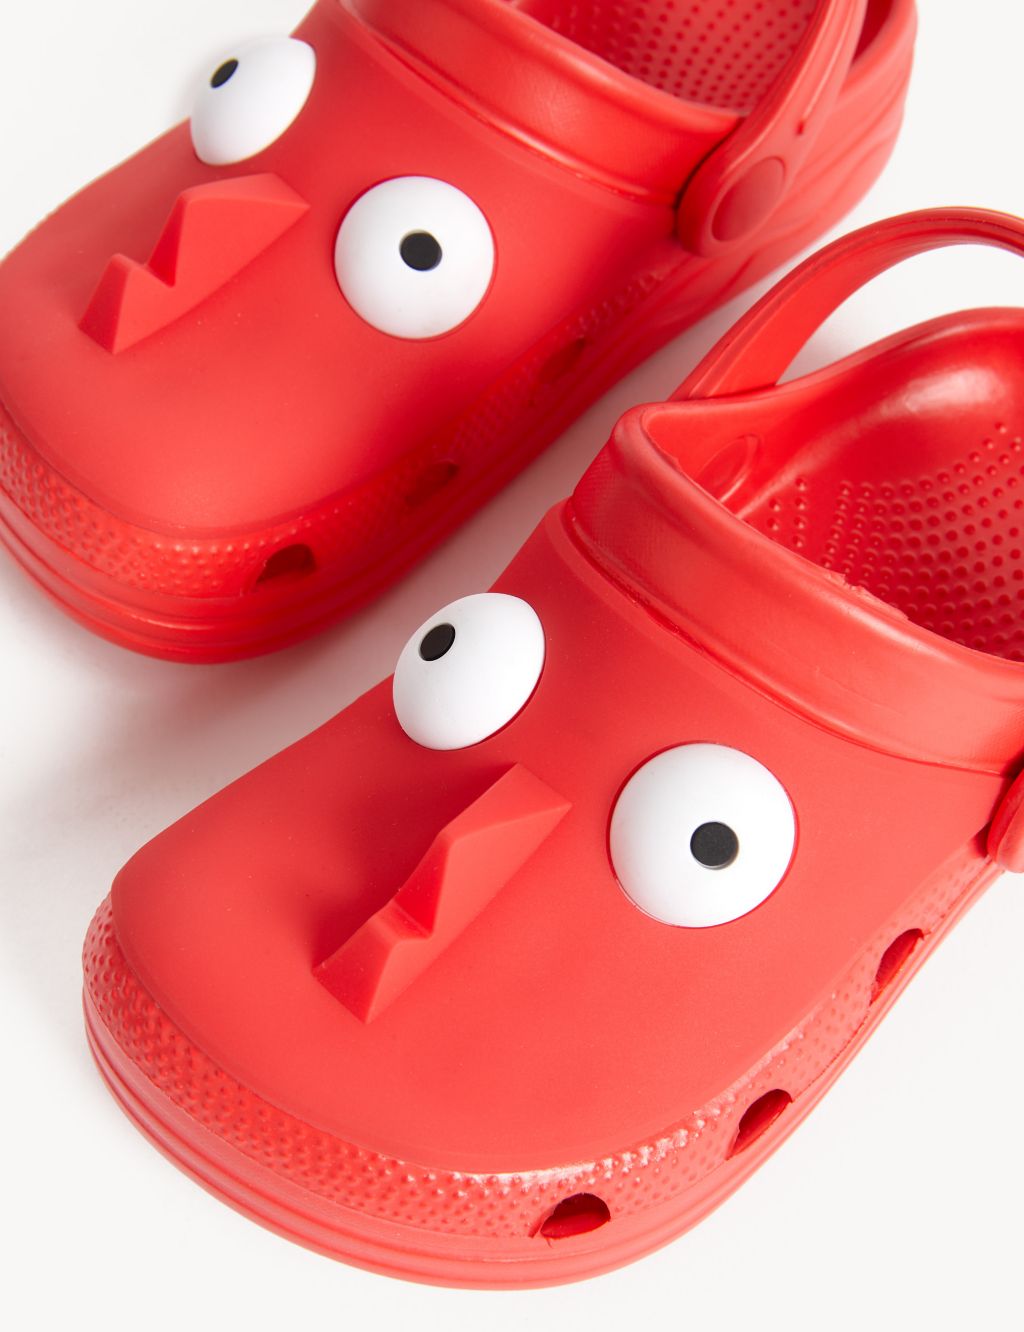 Kids' Monster Clogs (4 Small - 2 Large) image 2